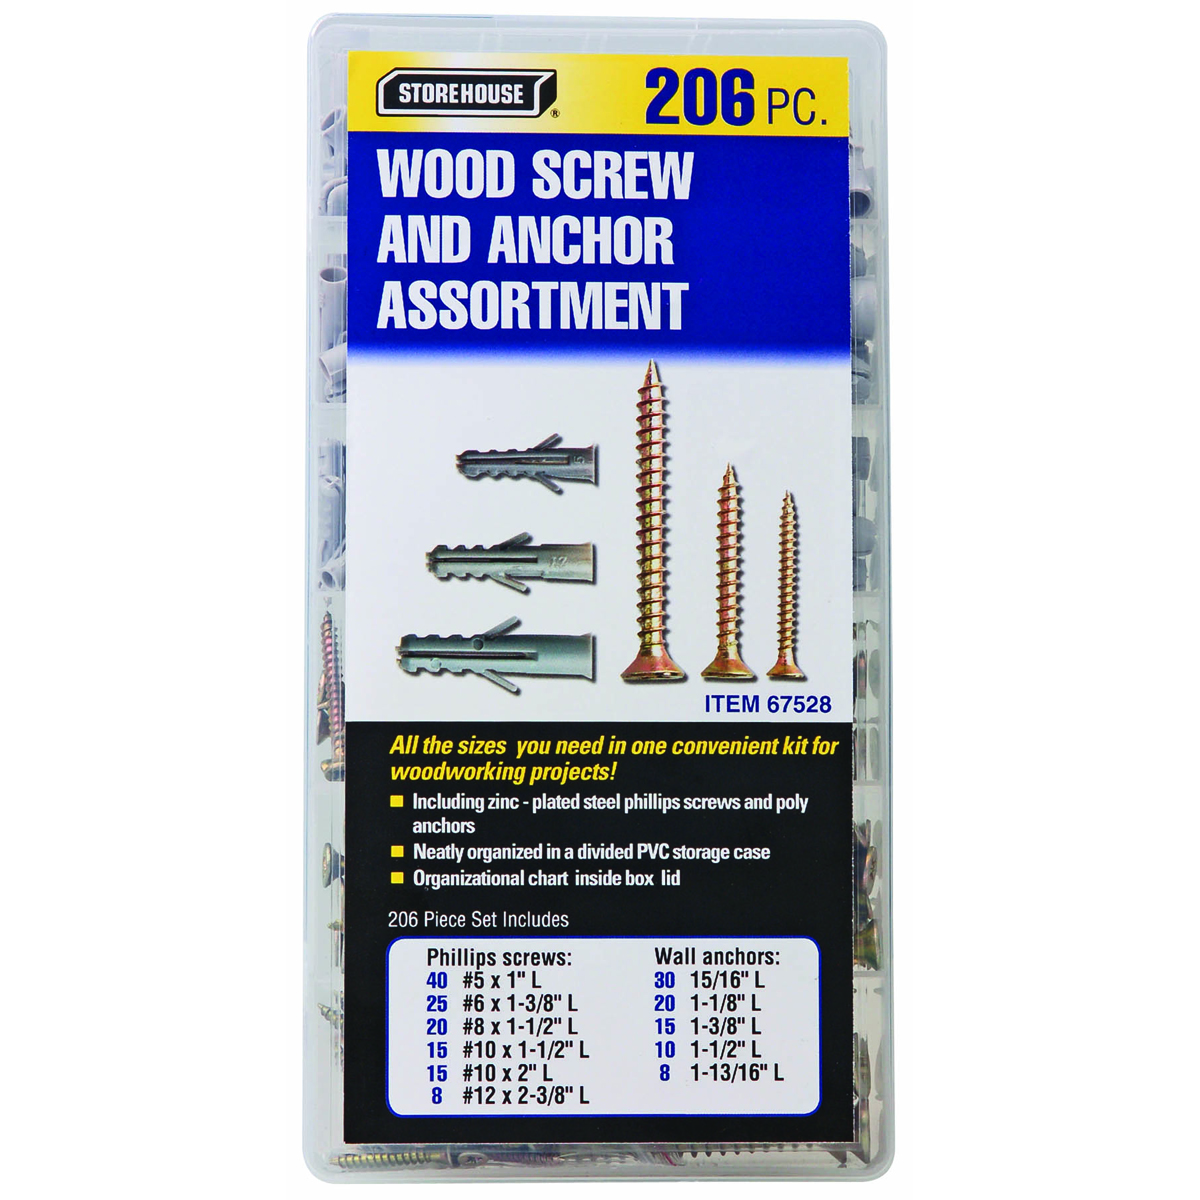 STOREHOUSE Anchors and Screws for Wood 206 Pc. - Item 67528